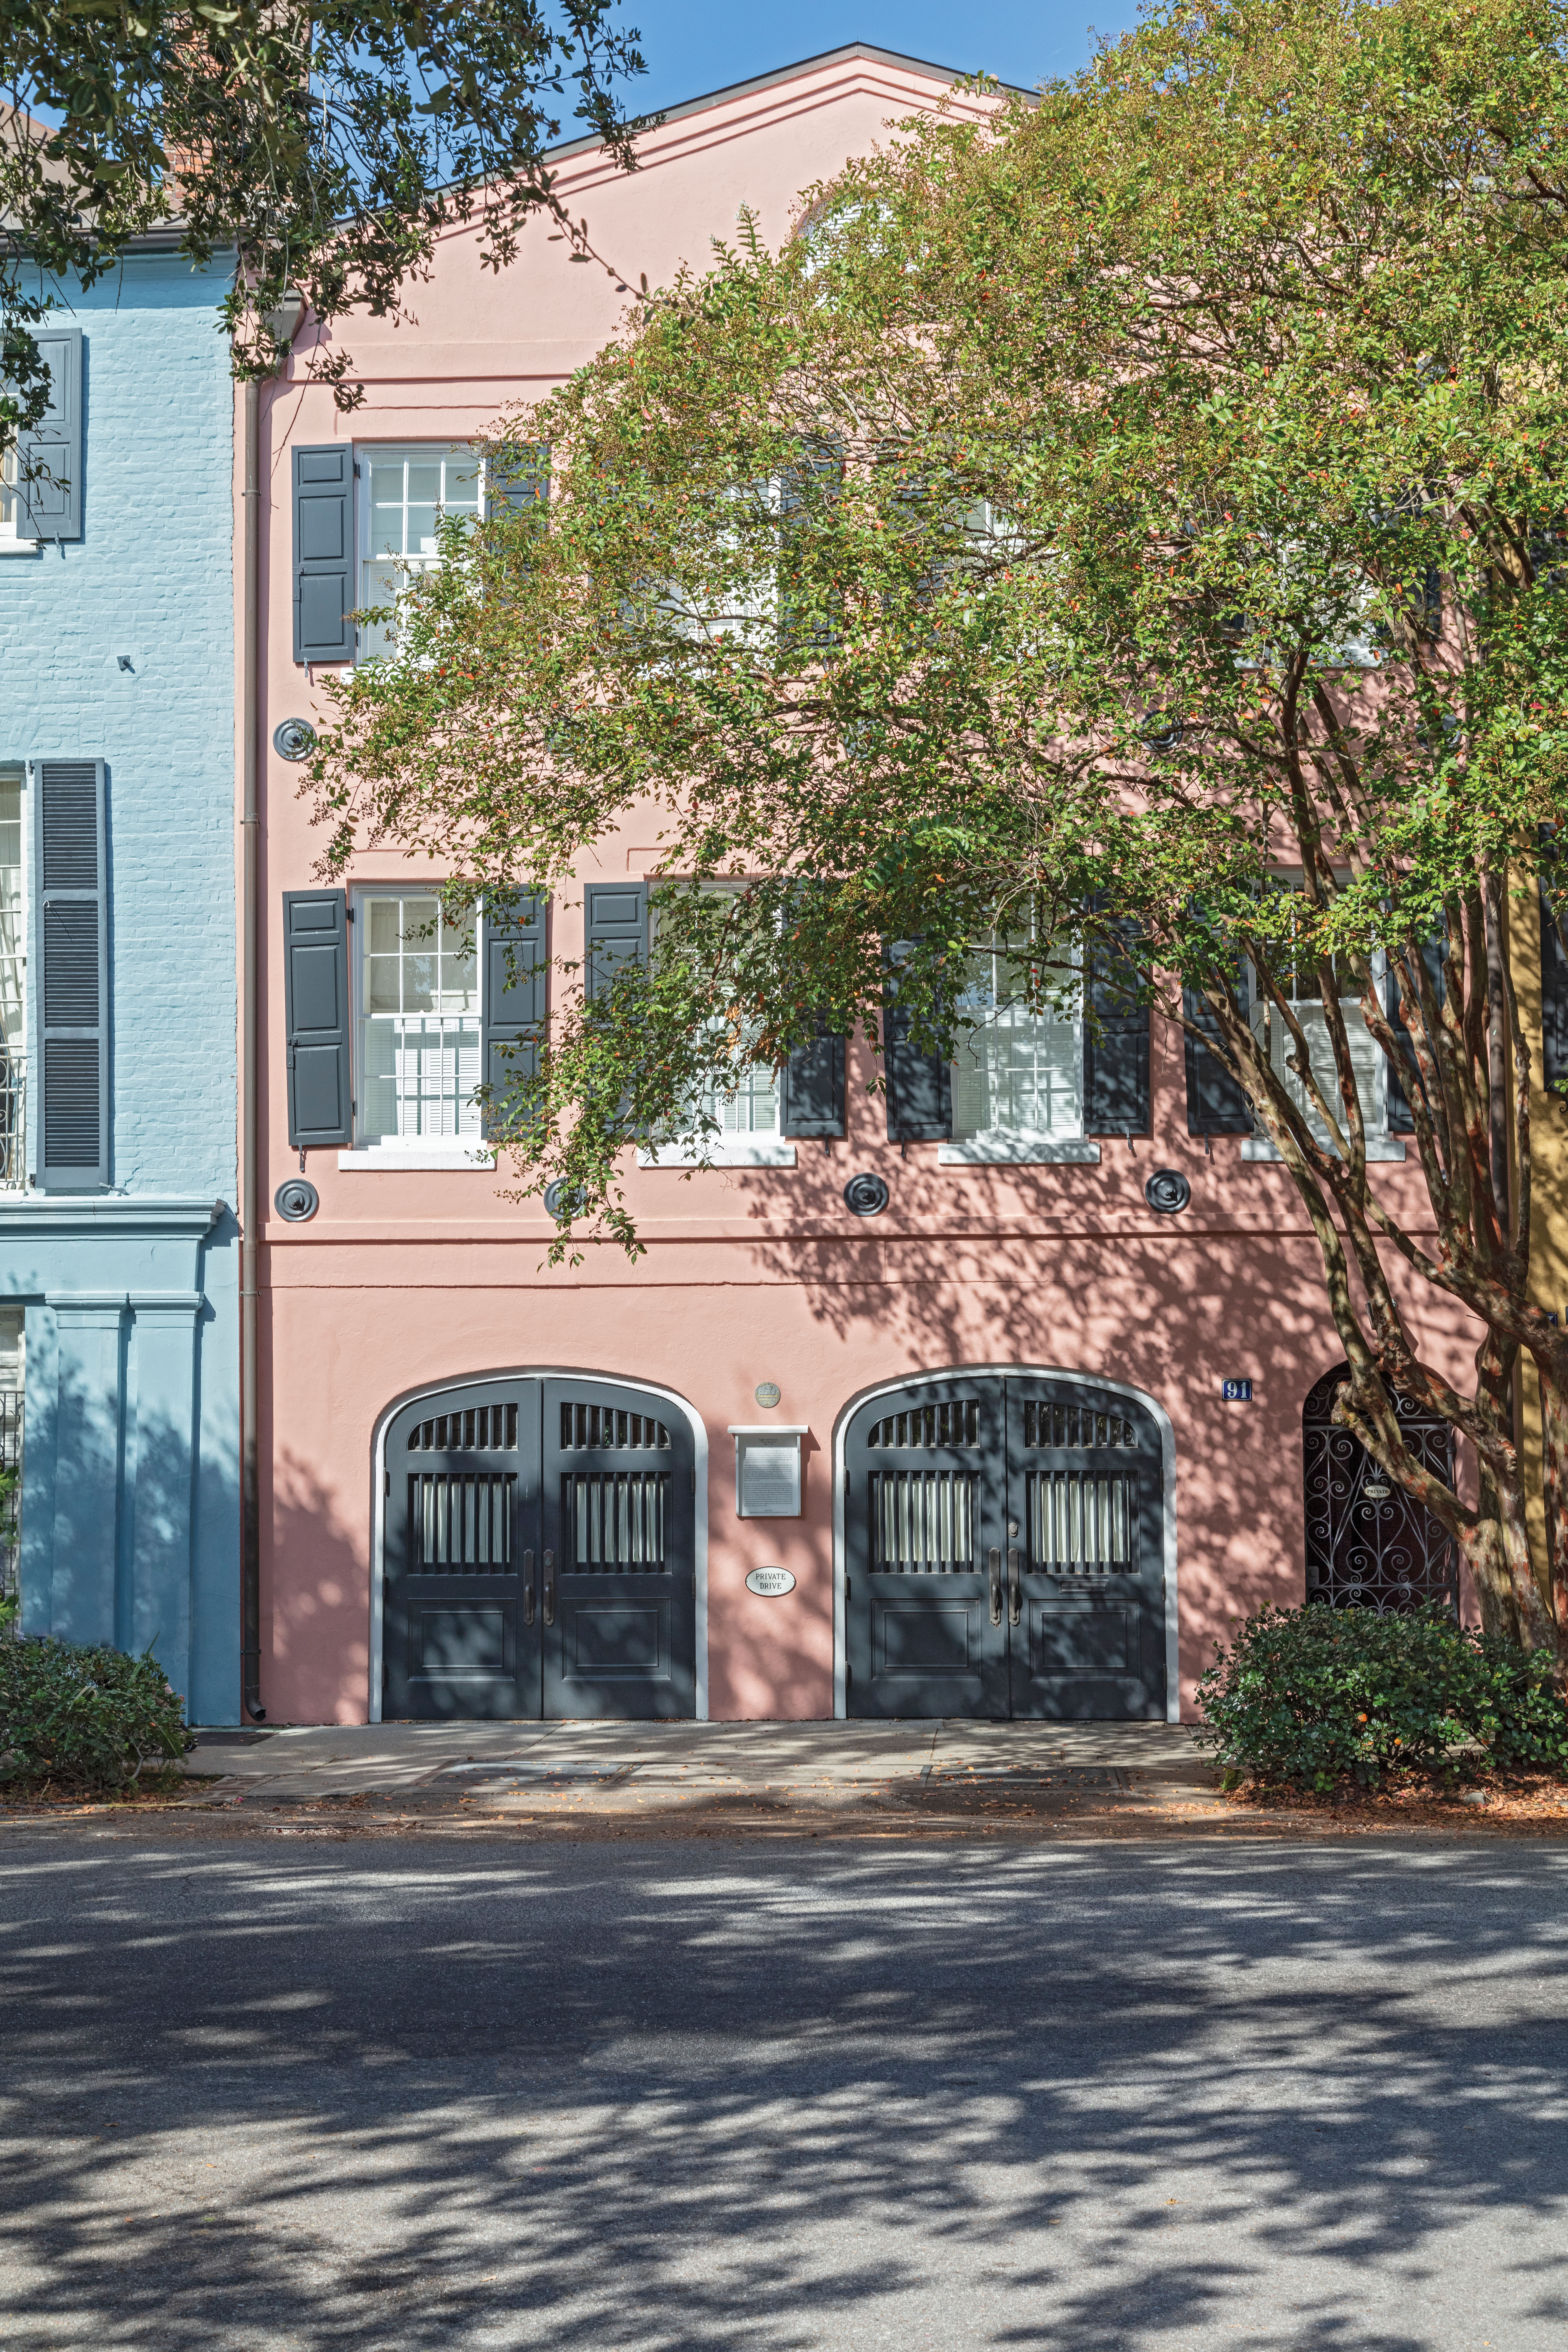 Pretty in Pink: The home required minimal renovation for the couple and their 13-year-old son to move in late last year. A fresh coat of “Damask Rose” from the Sherwin-Williams Historic Charleston Collection for the exterior and some colorful updates on the interior helped breathe new life into the centuries-old residence.